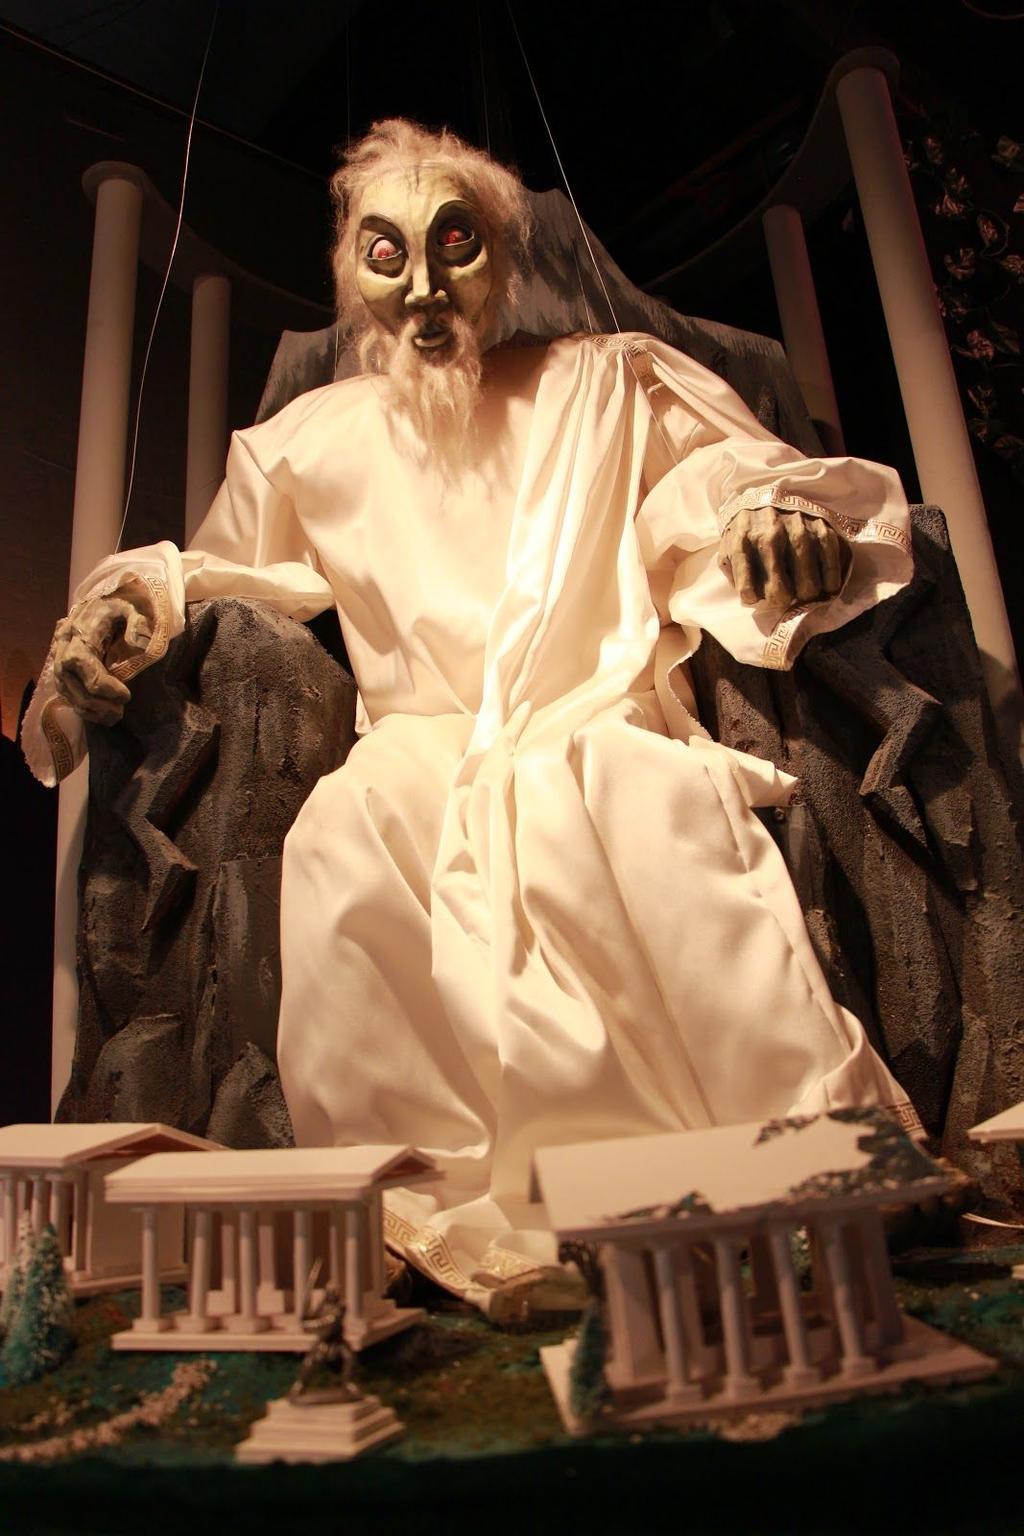 Included are applicable South Carolina standards, a synopsis of the show, types of puppetry used and discussion topics for before and after the show.